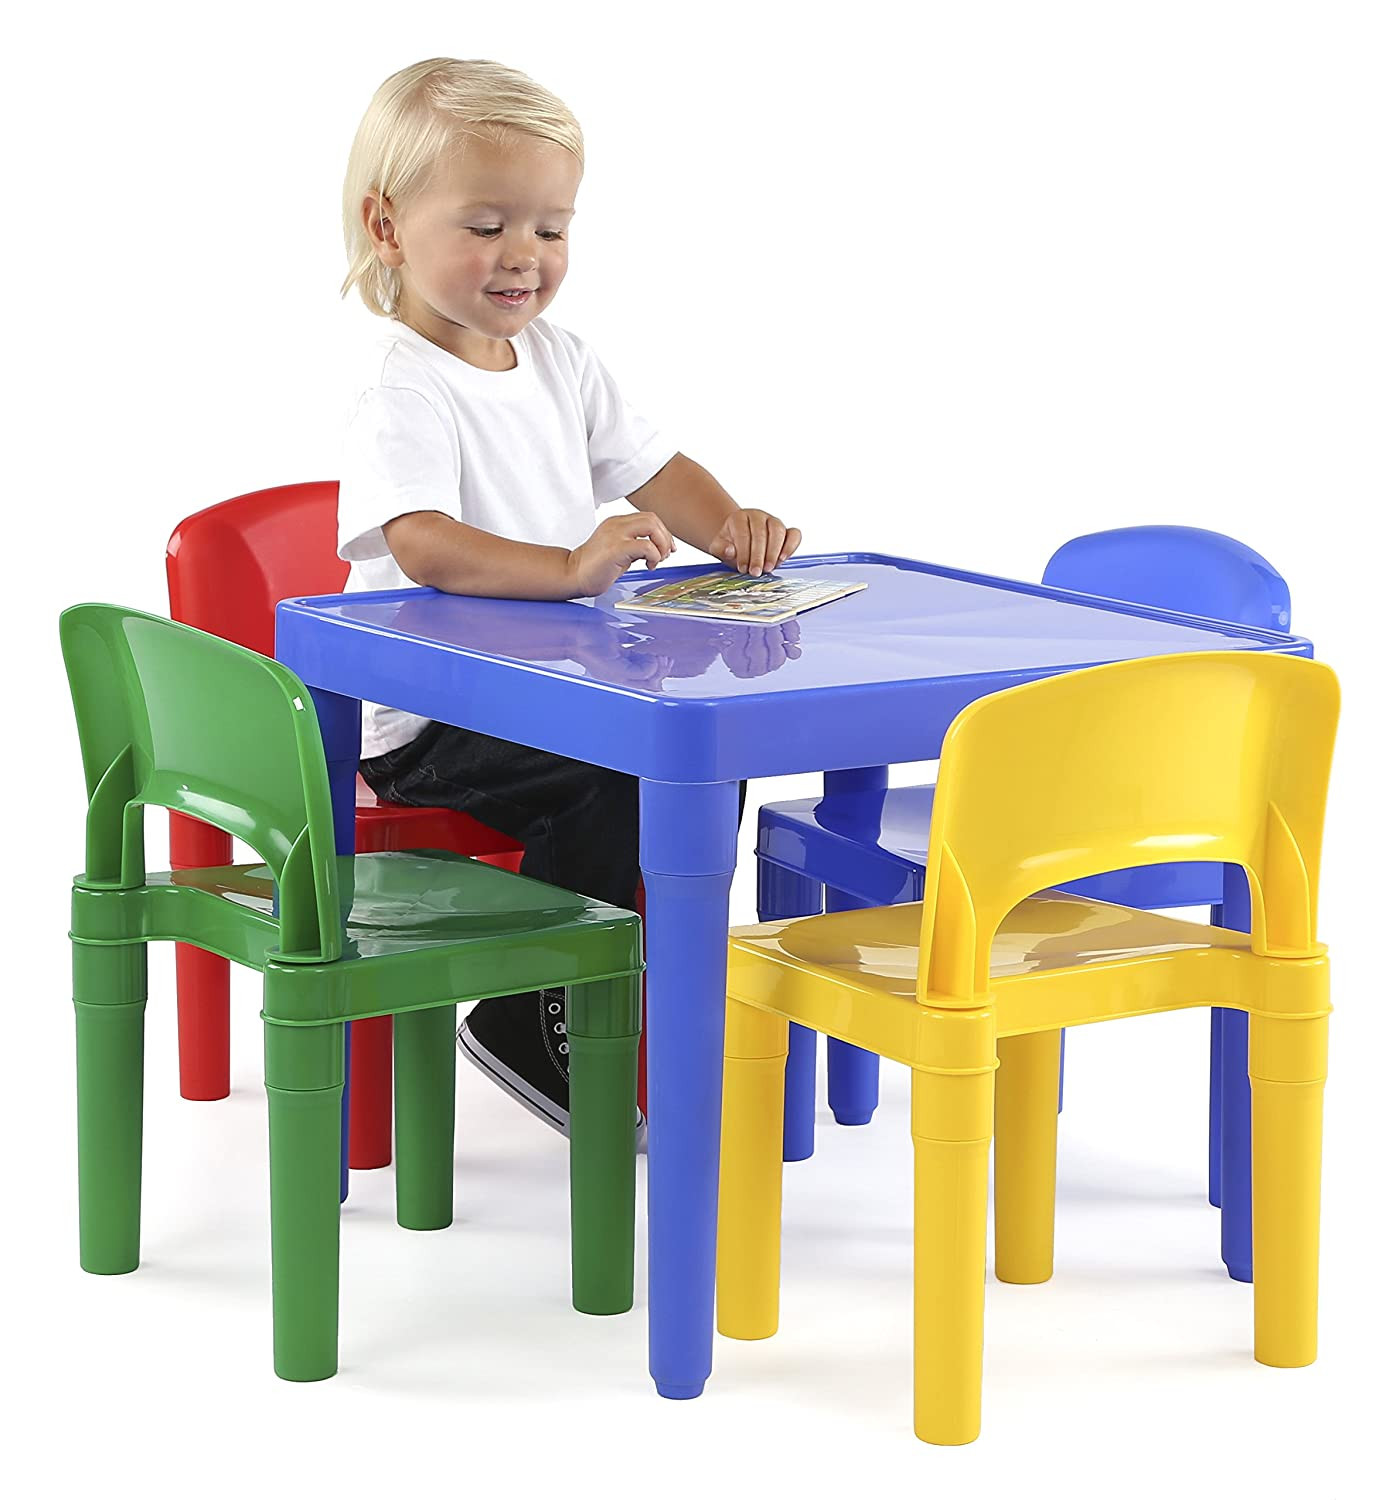 Amazon Kids Table And Chairs
 Table Chair Set For Kids & Kids Table With Chairs Quad